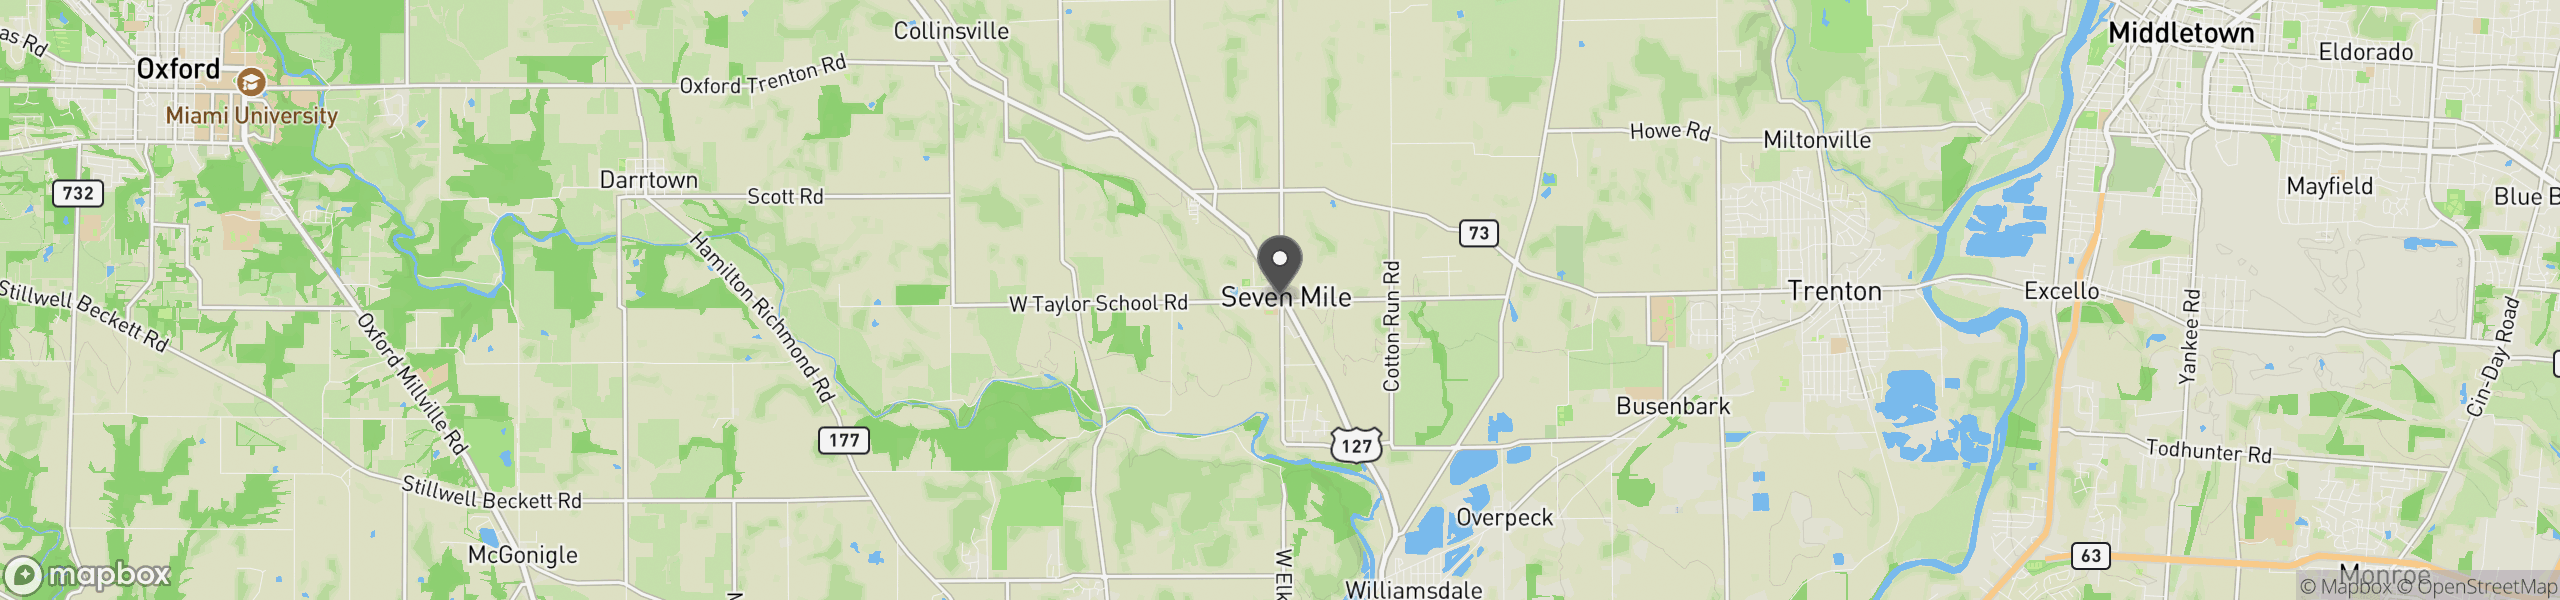 Seven Mile, OH